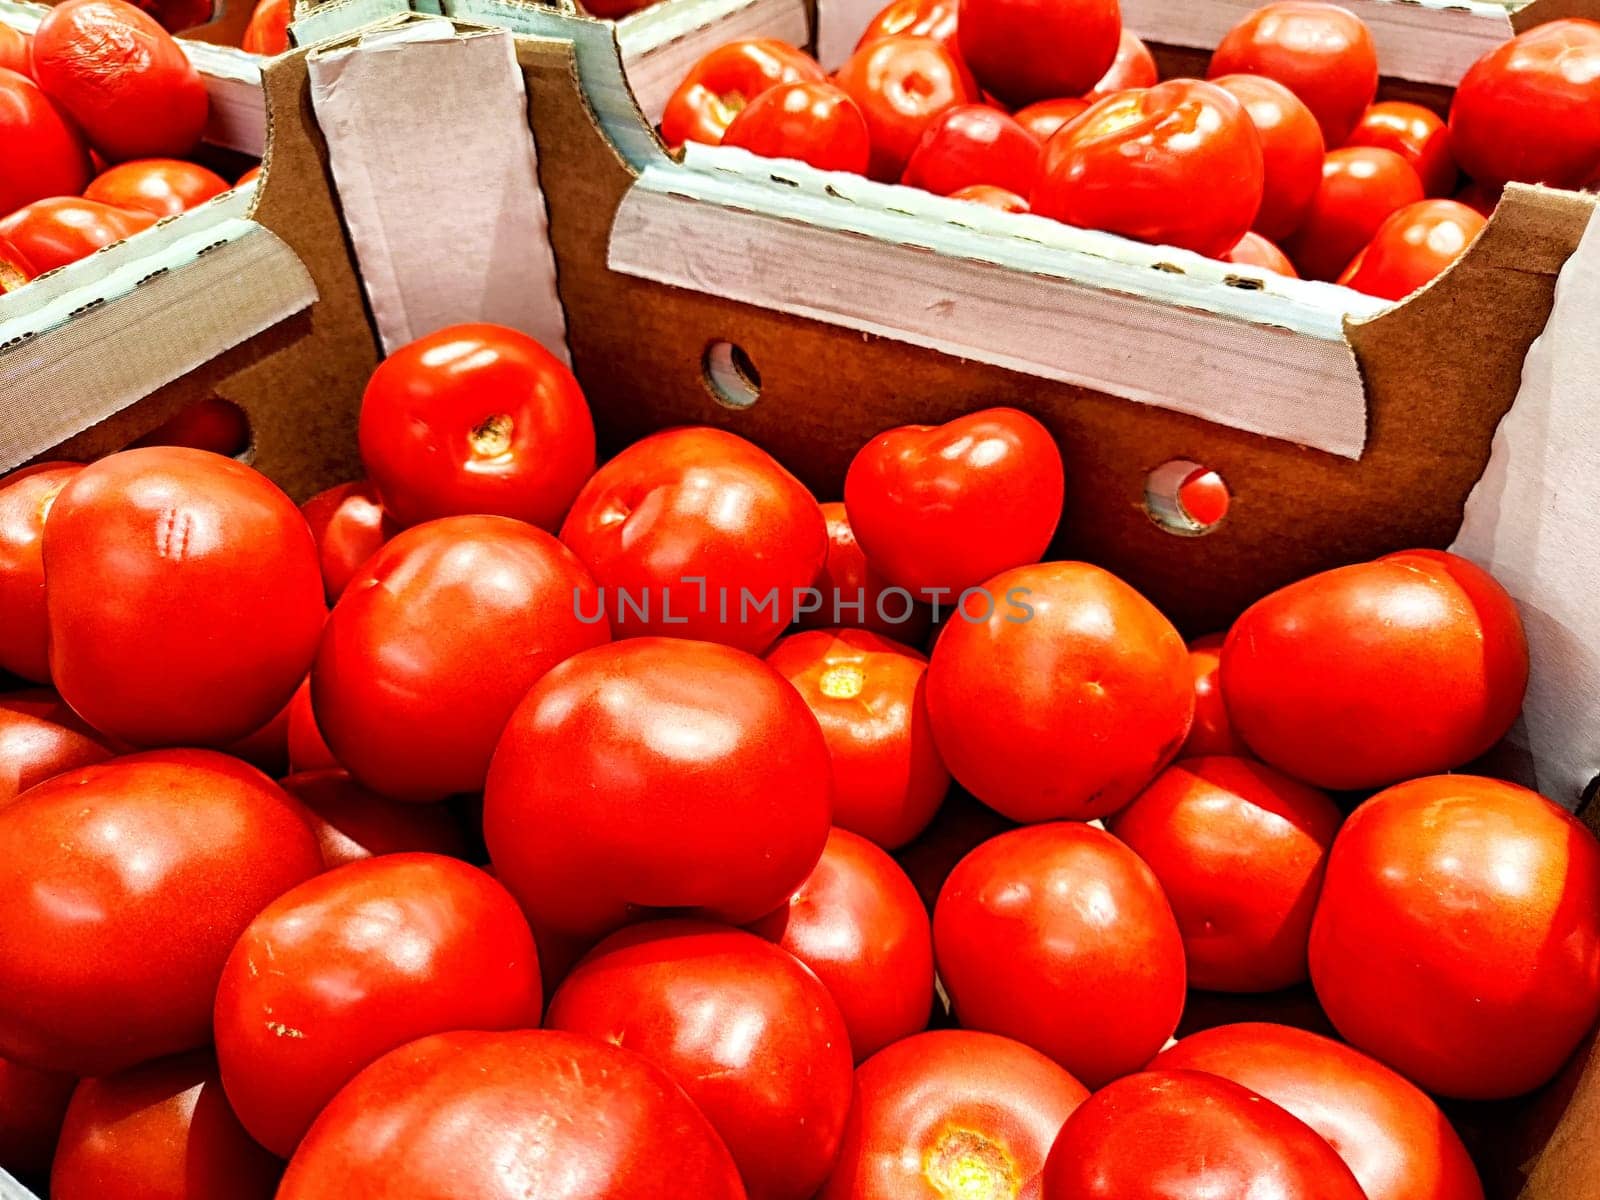 Red ripe tomatoes in cardboard boxes. Fresh Tomatoes Displayed for Sale at a Local Market